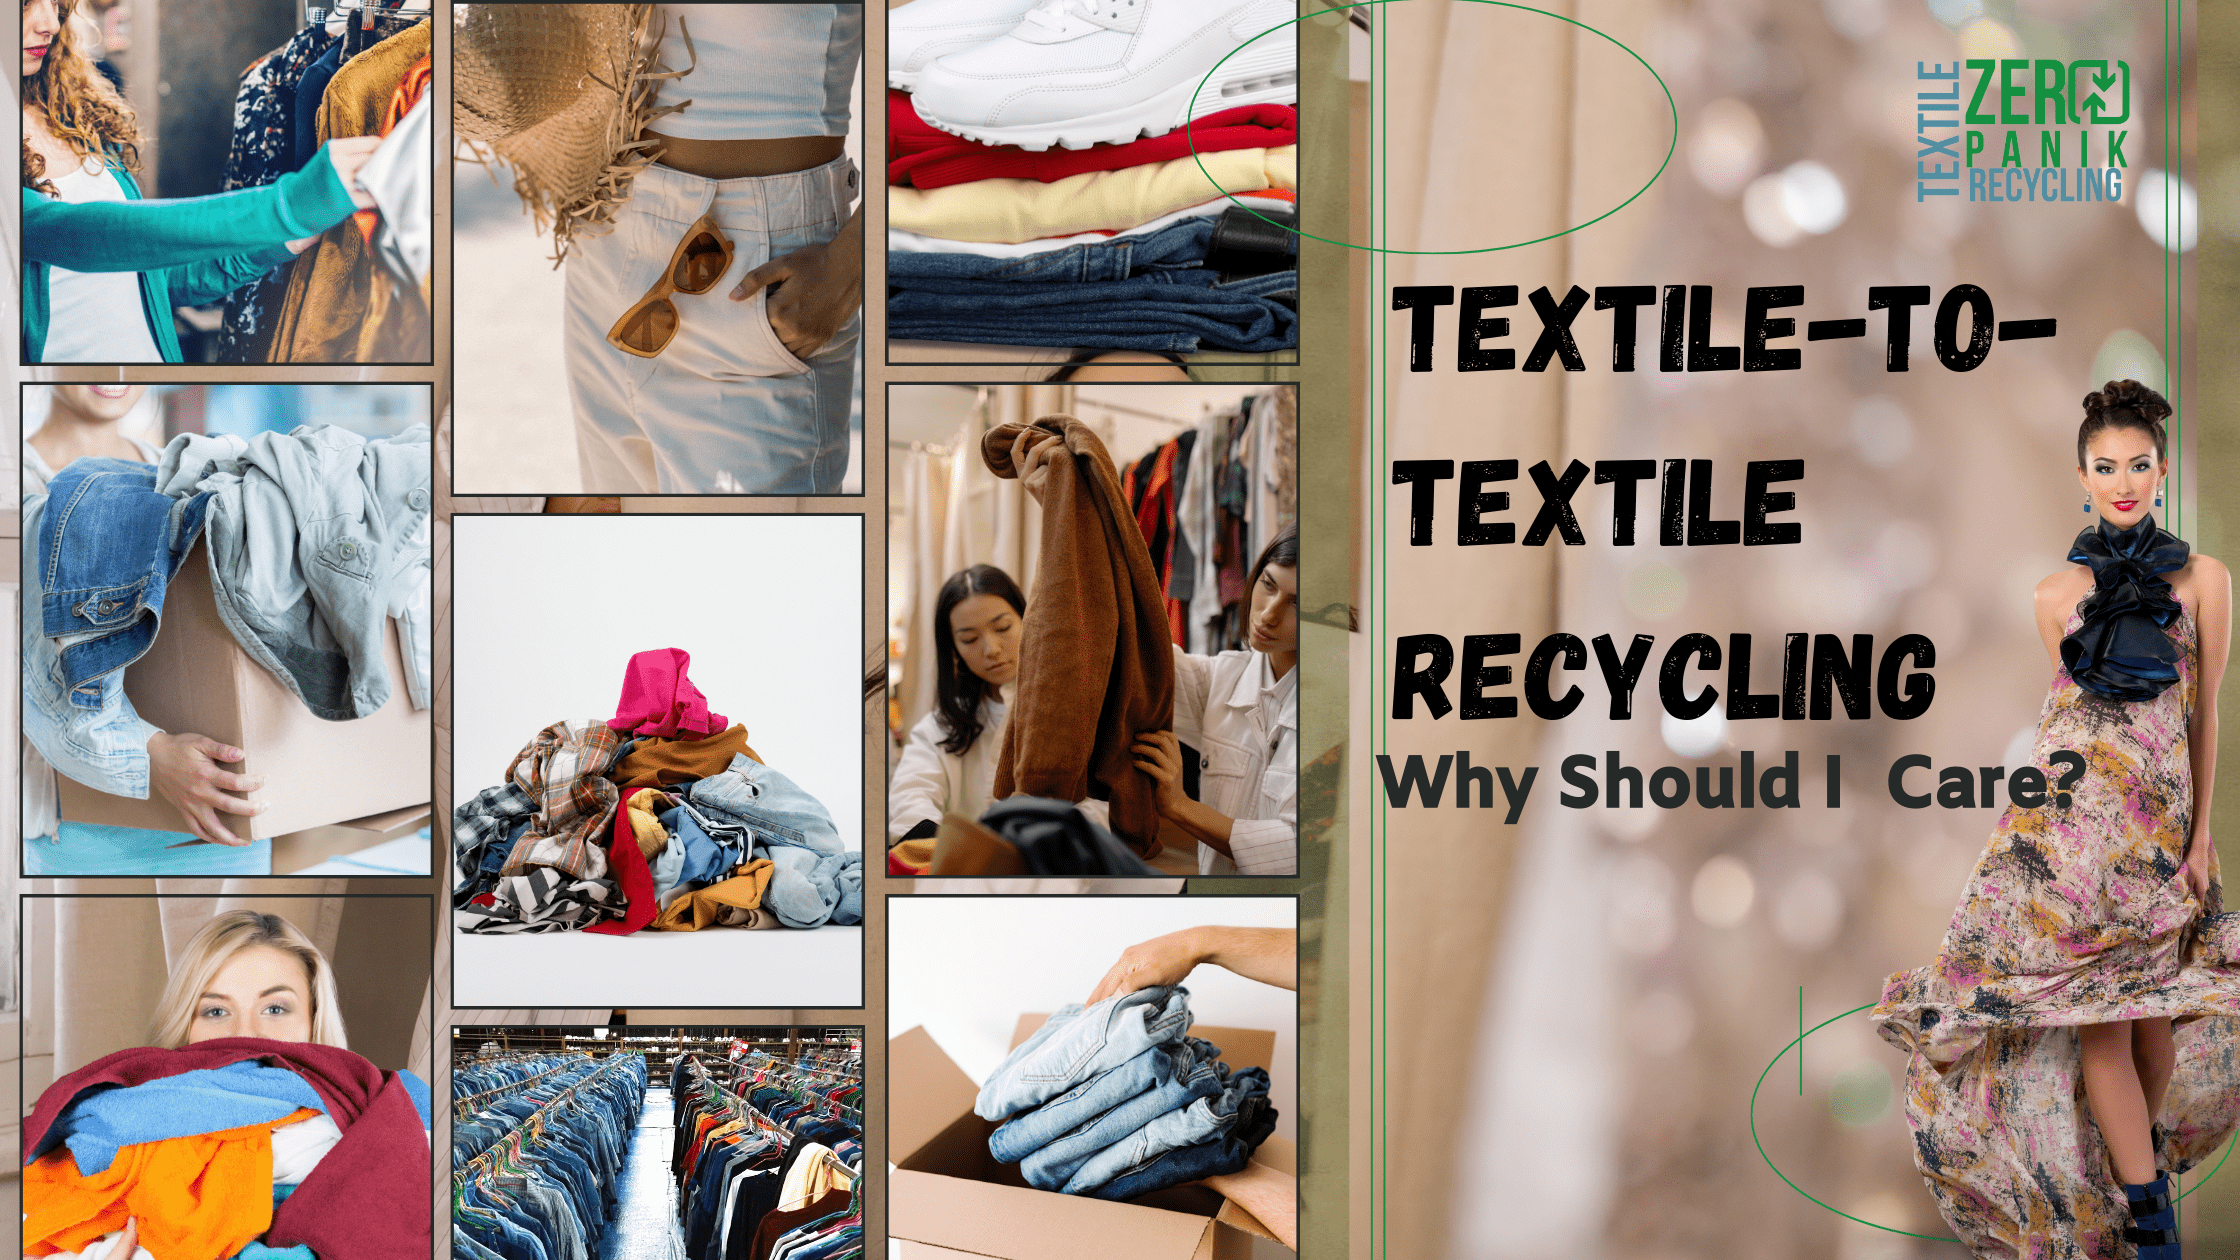 Why You Should Care About Textile-to-Textile Recycling - ZeroPanik